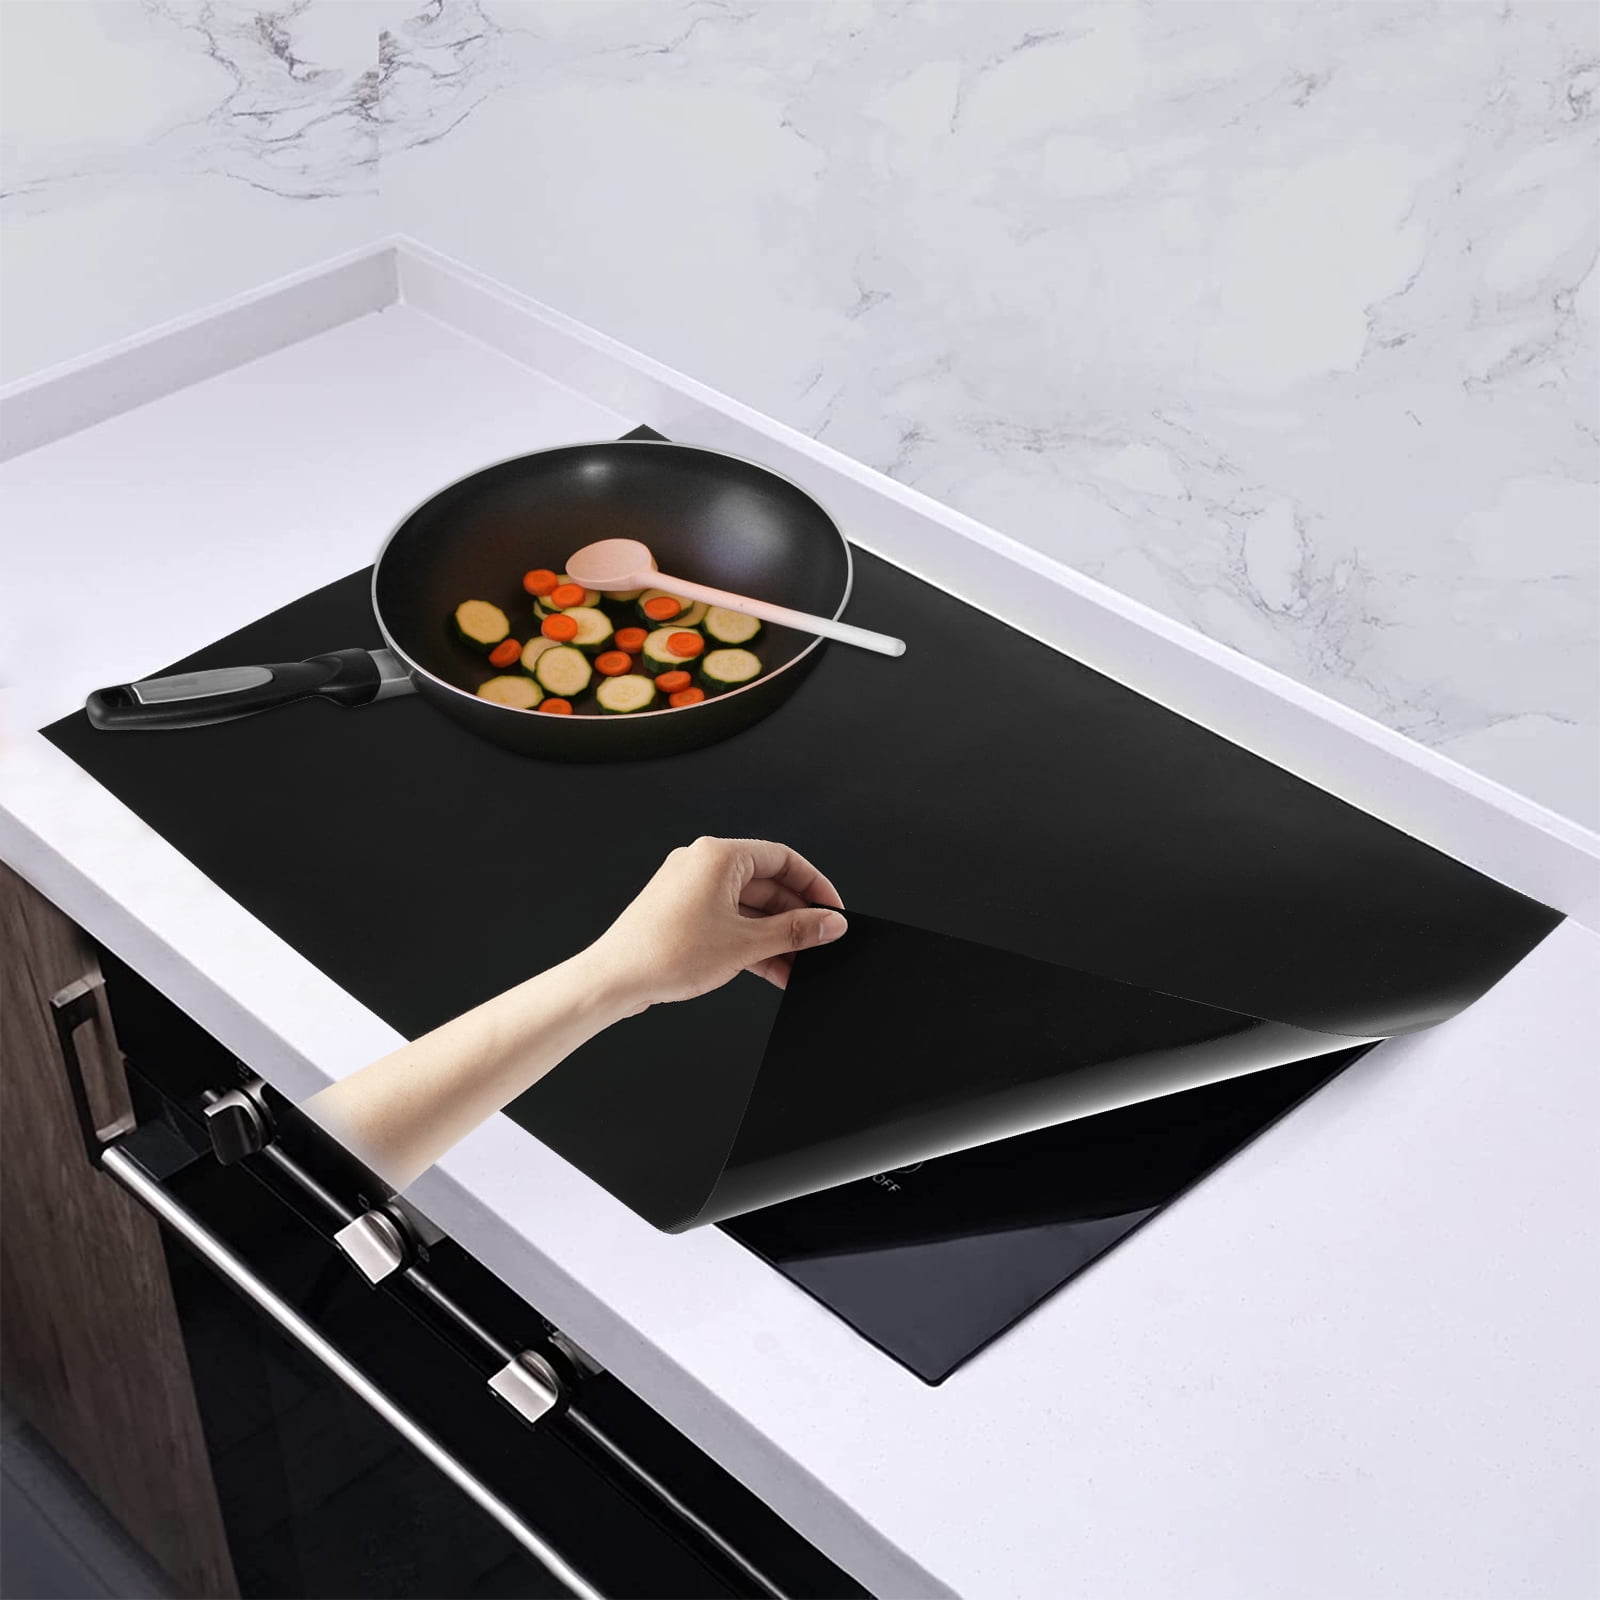 yeload Large Stove Cover Clear Induction Cooktop Protector, Glass